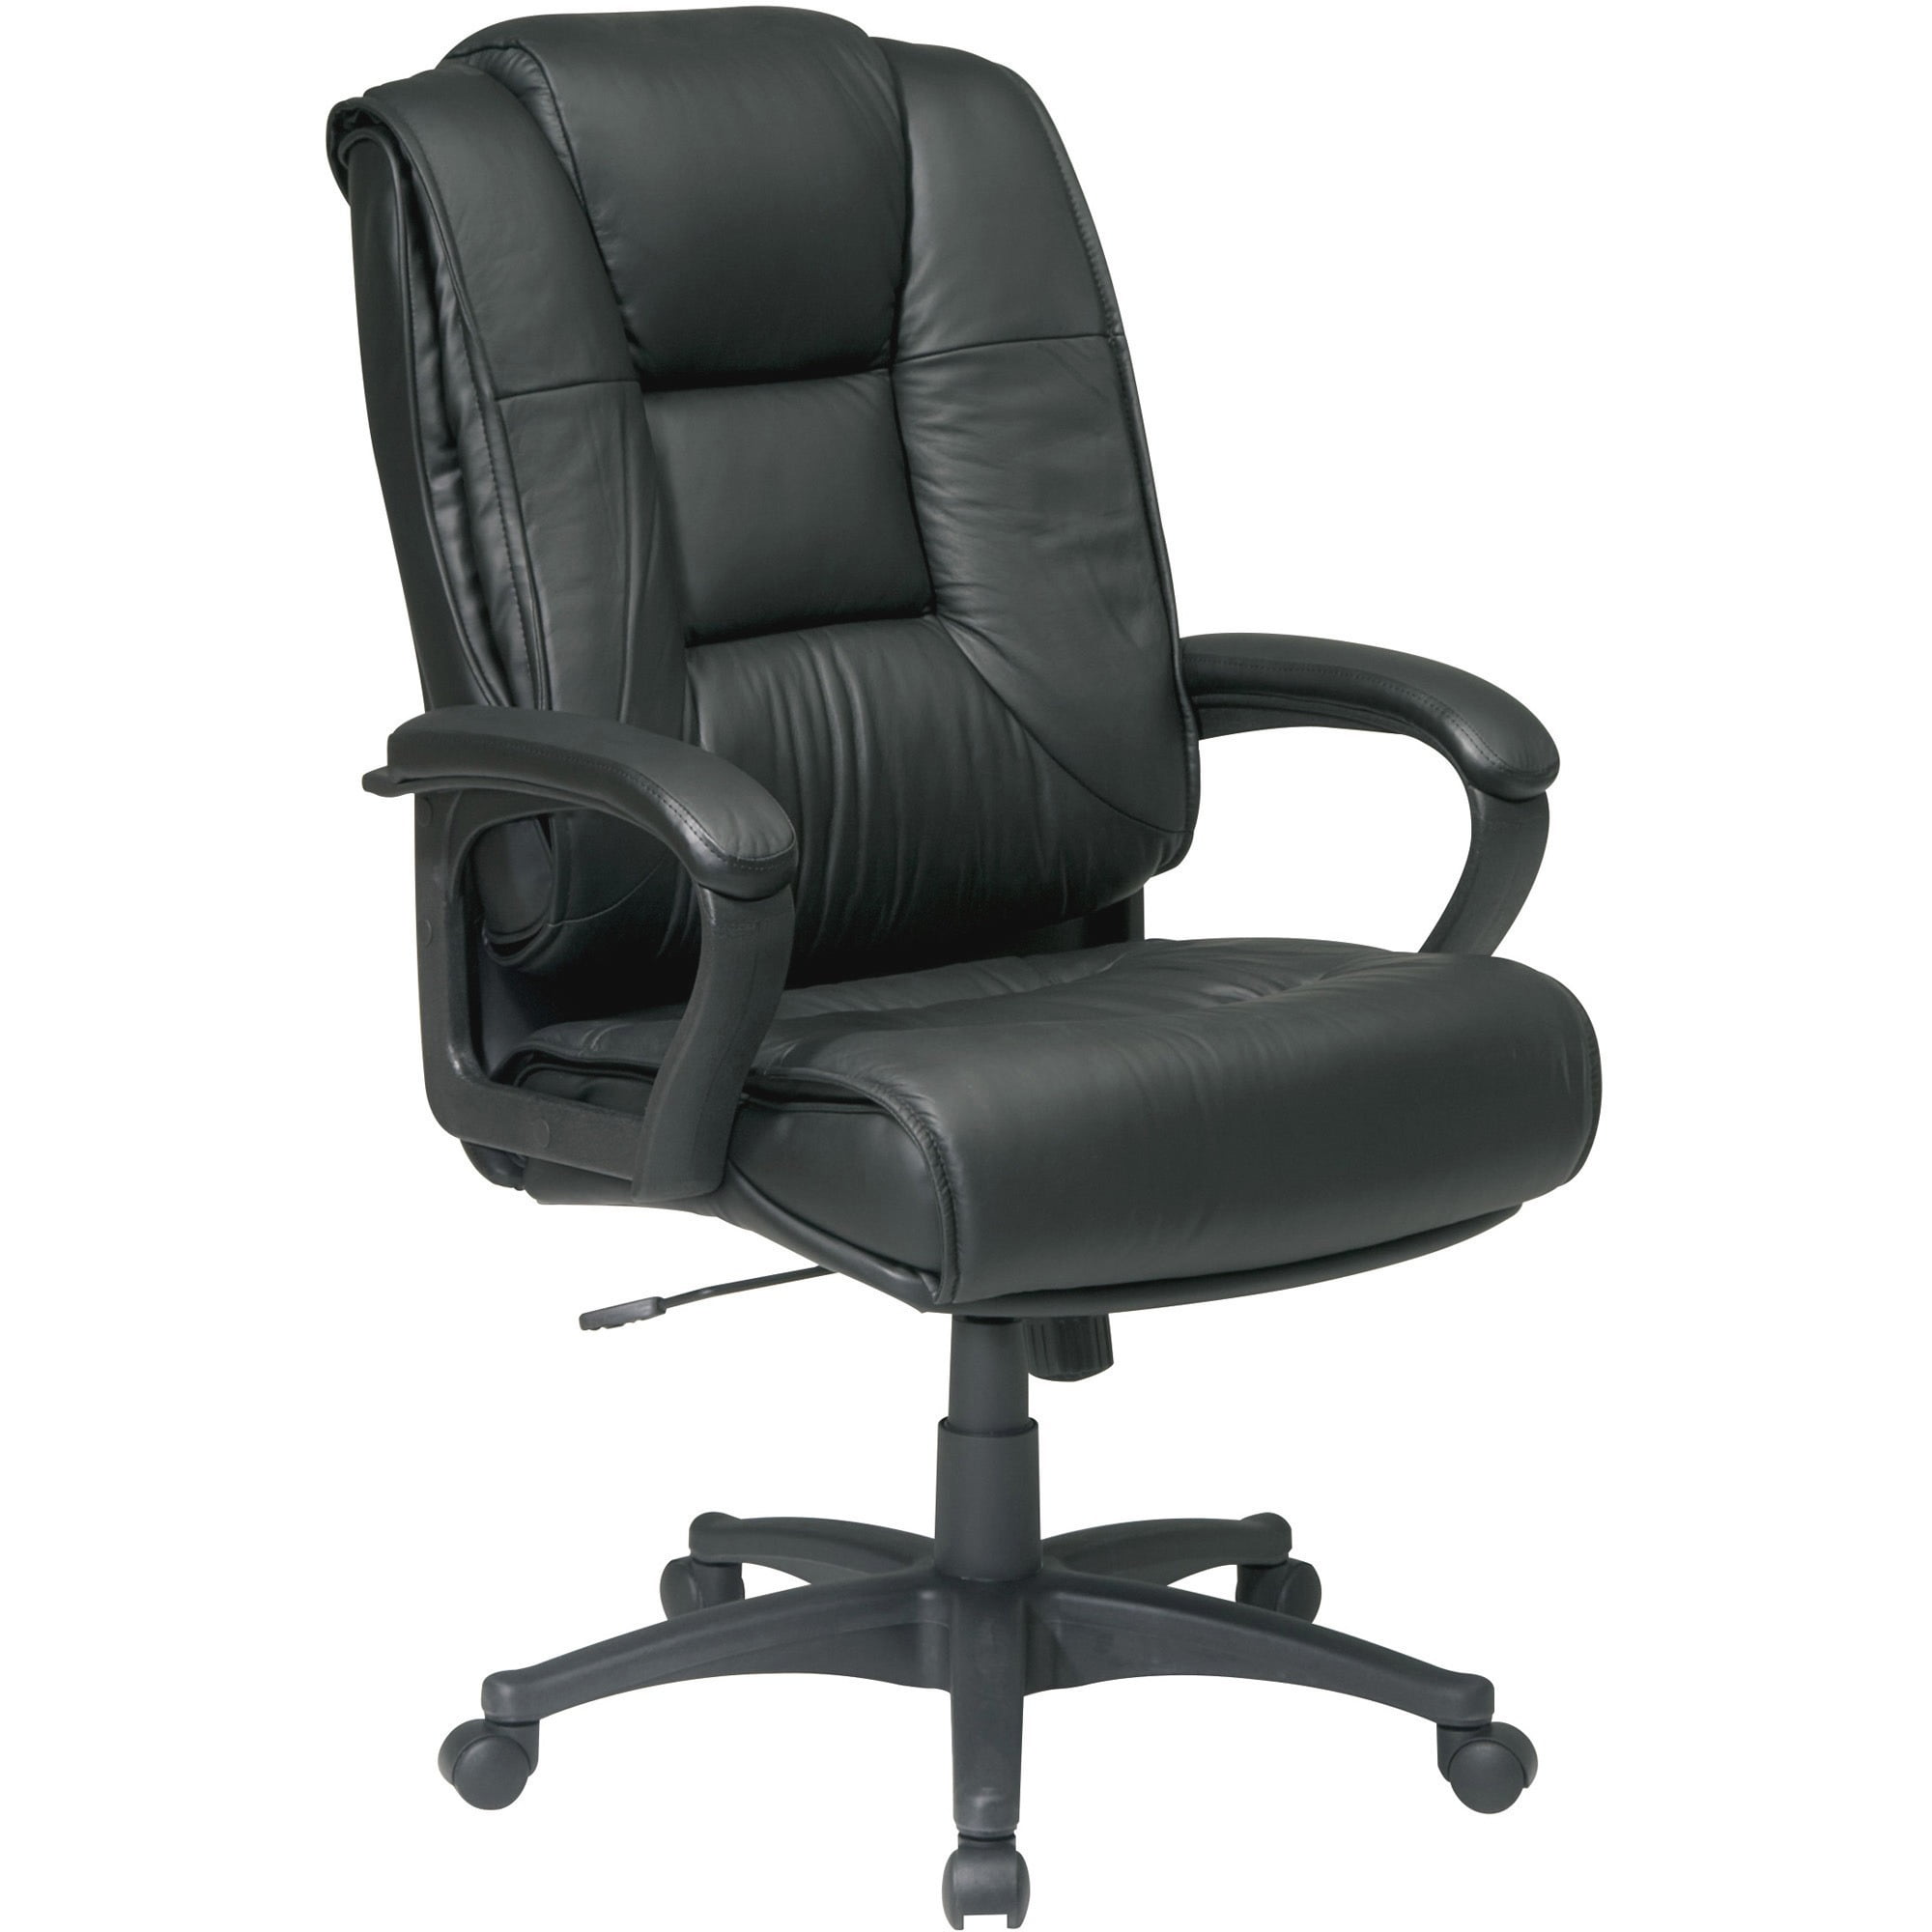 Office Star EX5162 Deluxe High Back Executive Leather Chair - Walmart